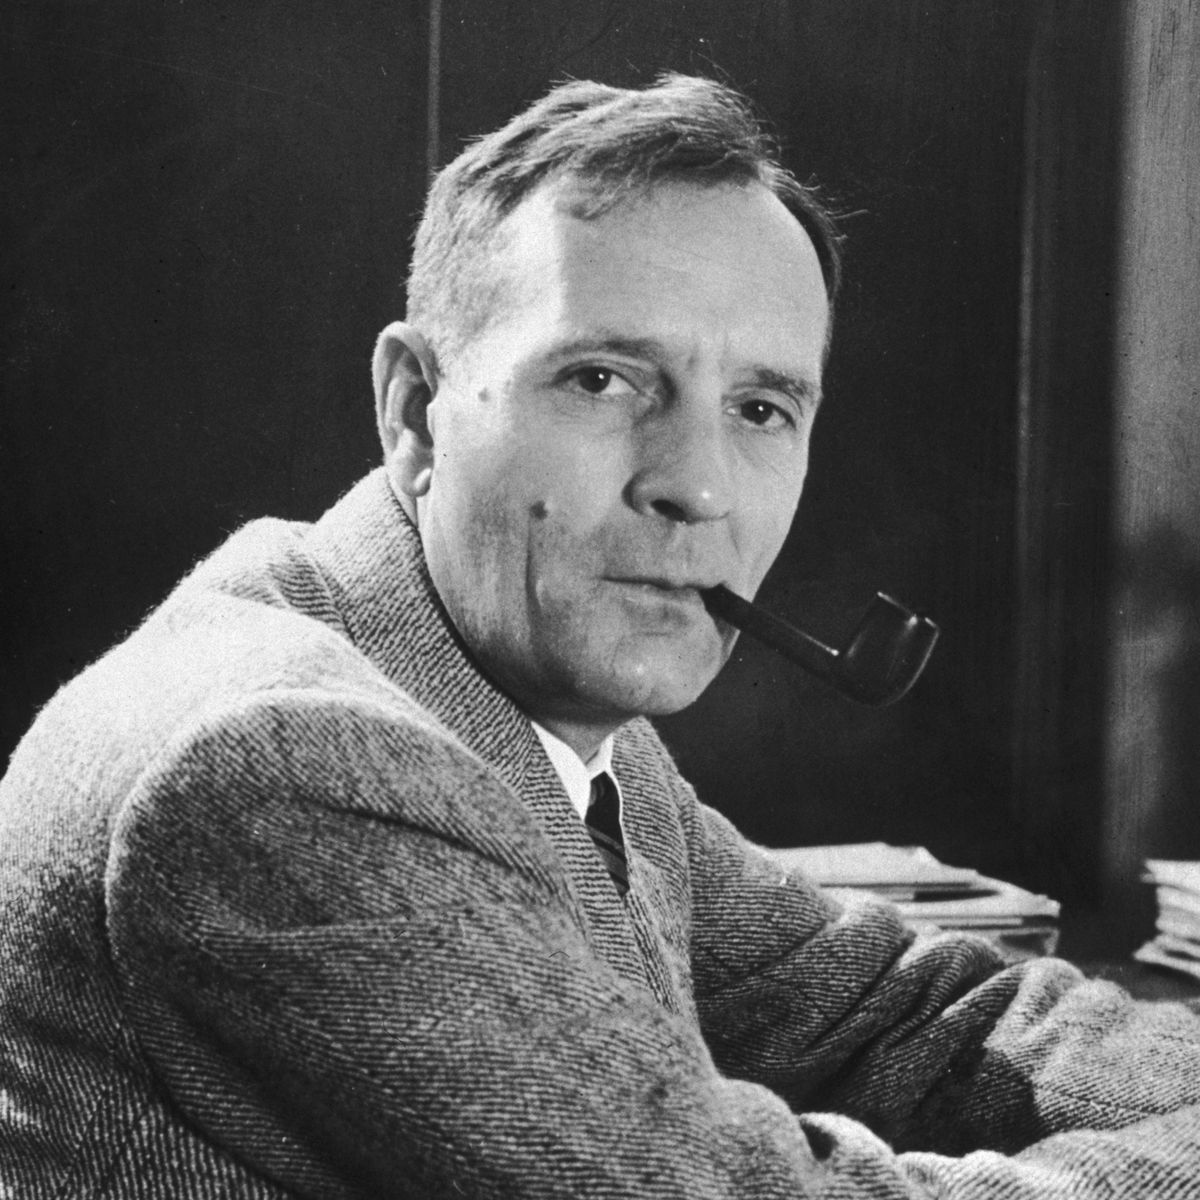 Happy Birthday to the stargazer who expanded our universe, Edwin Hubble! His discoveries reshaped our understanding of the cosmos, unveiling the vastness of space. #EdwinHubble #CosmicExplorer #HappyBirthdayEdwinHubble Read Bio:- thefamouspersonalities.com/profile/astron…